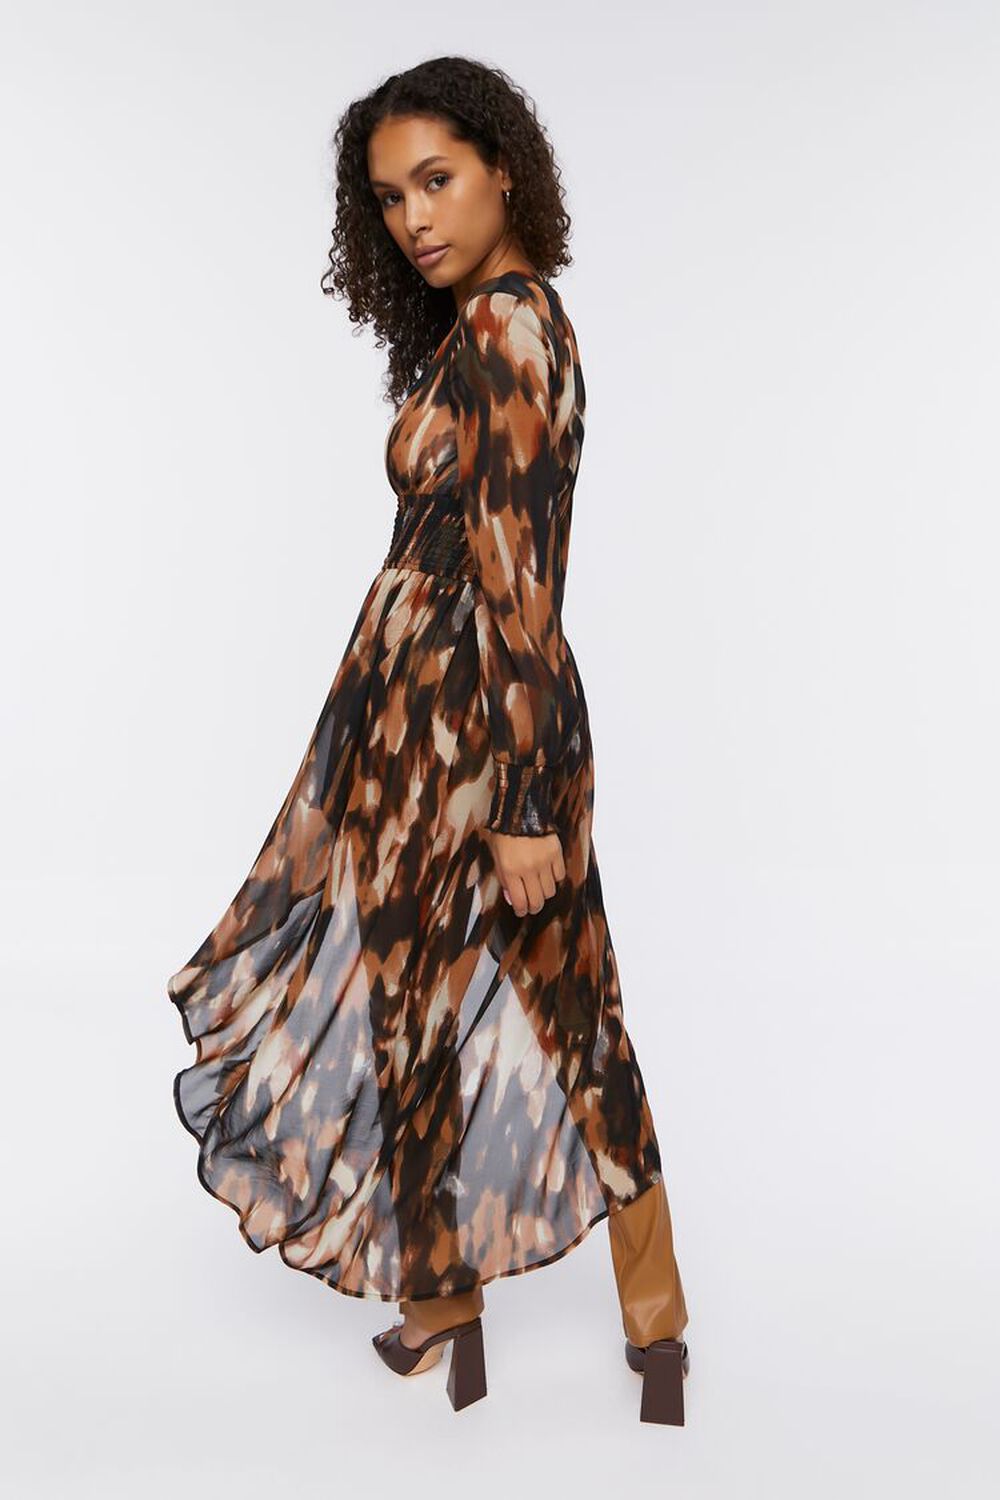 BROWN/MULTI Abstract Print Duster Tunic, image 3